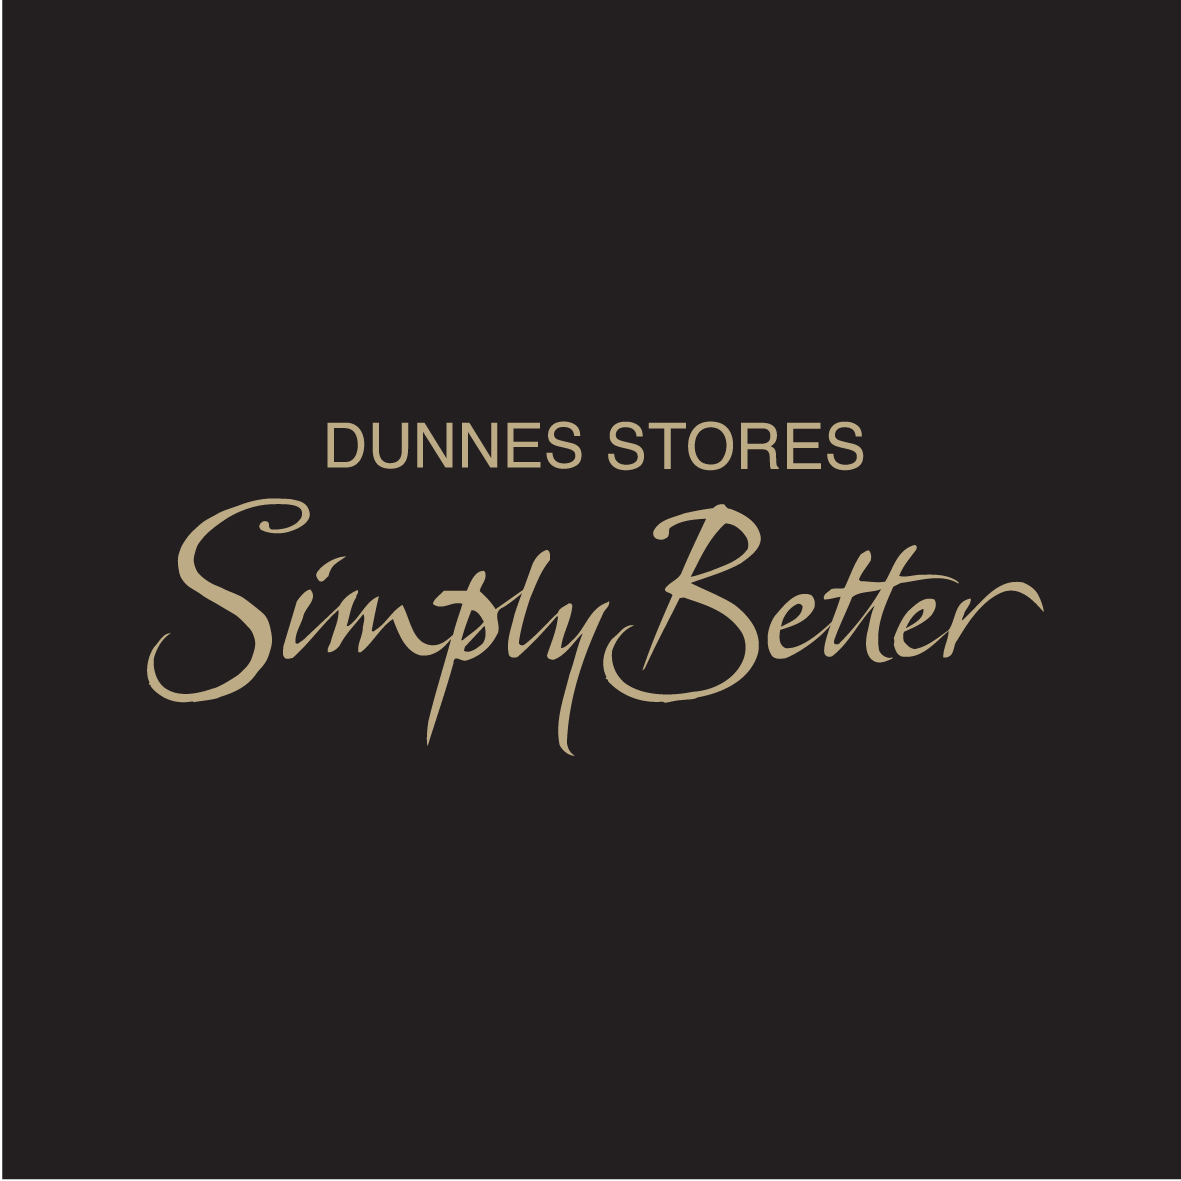 Simply Better by Dunnes Stores